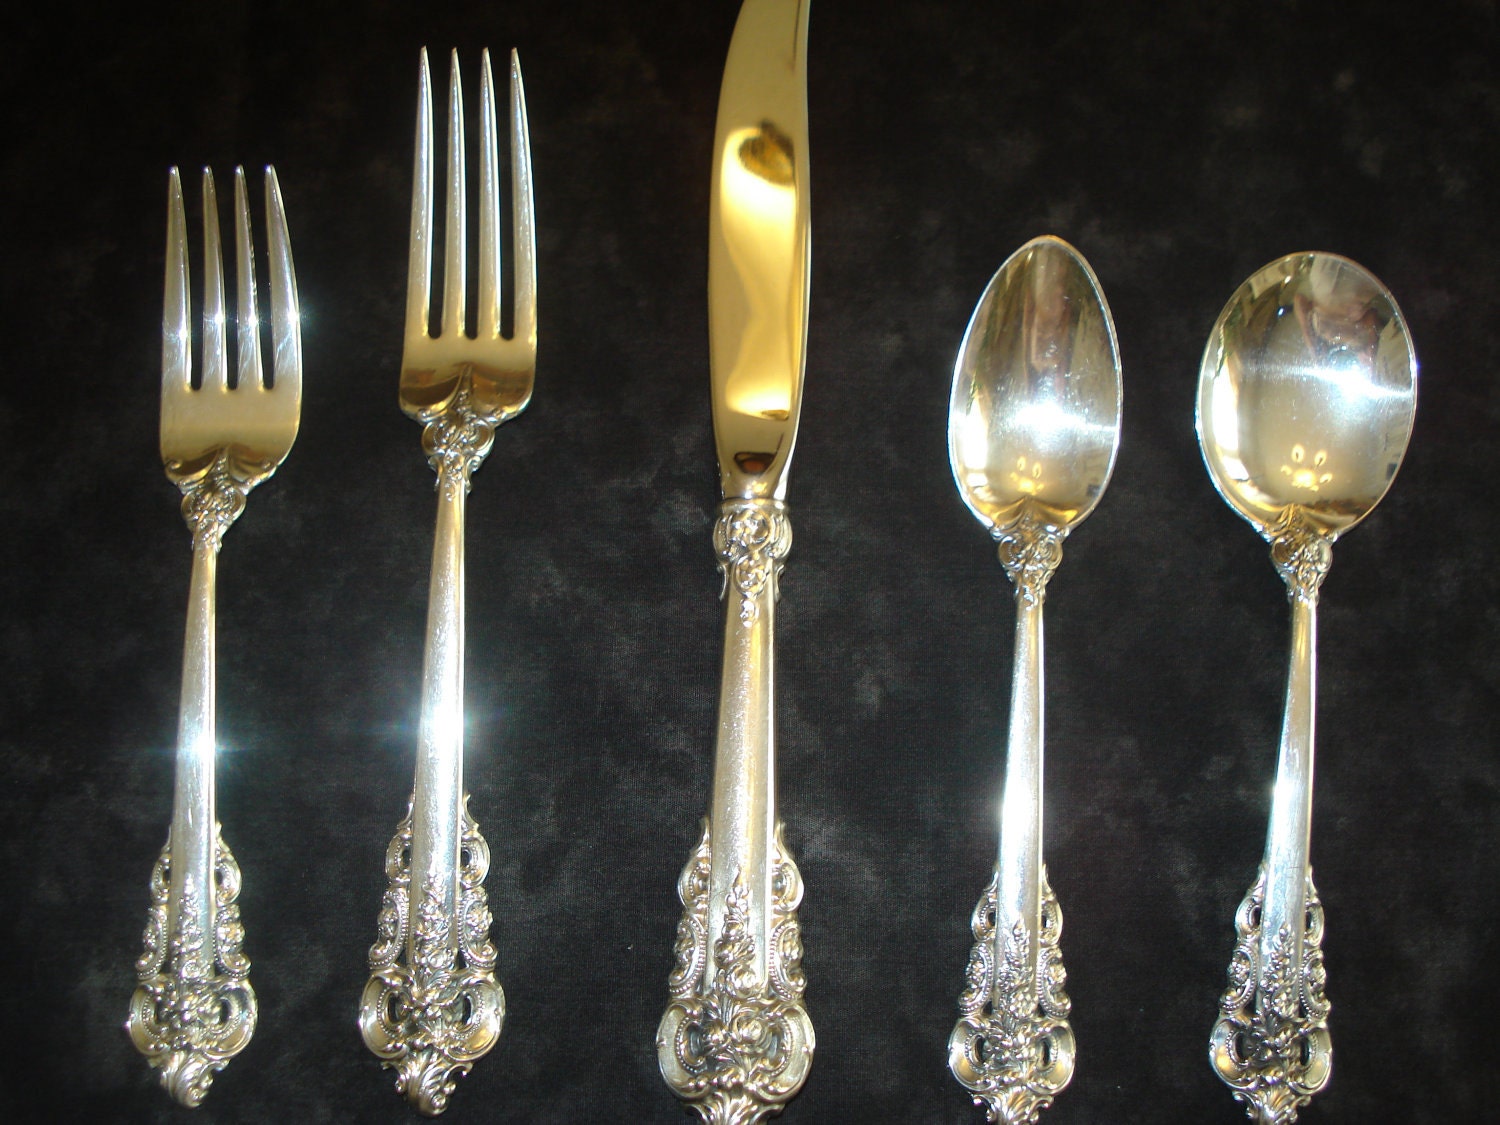 Wallace Sterling Silver Grand Baroque Flatware Fantastic for Christmas or any Occasion  15% OFF  HAPPYHOLIDAYS4U  AT CHECKOUT